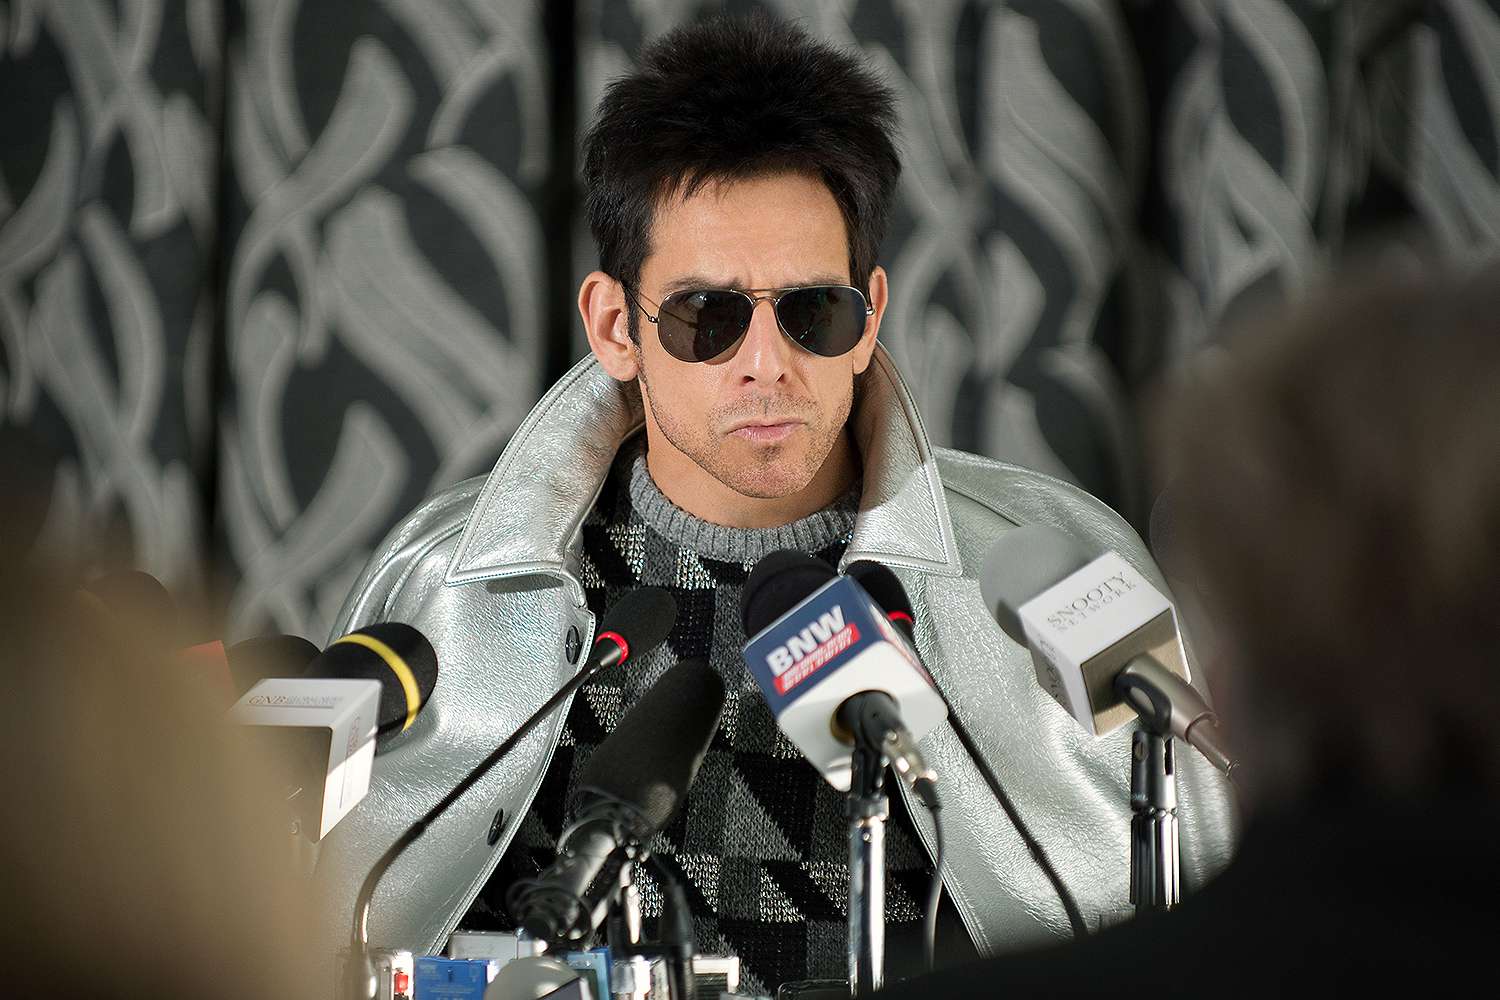 Ben Stiller Says He Was 'Shook' by Negative Zoolander 2 Reviews: 'Makes You Question' Things